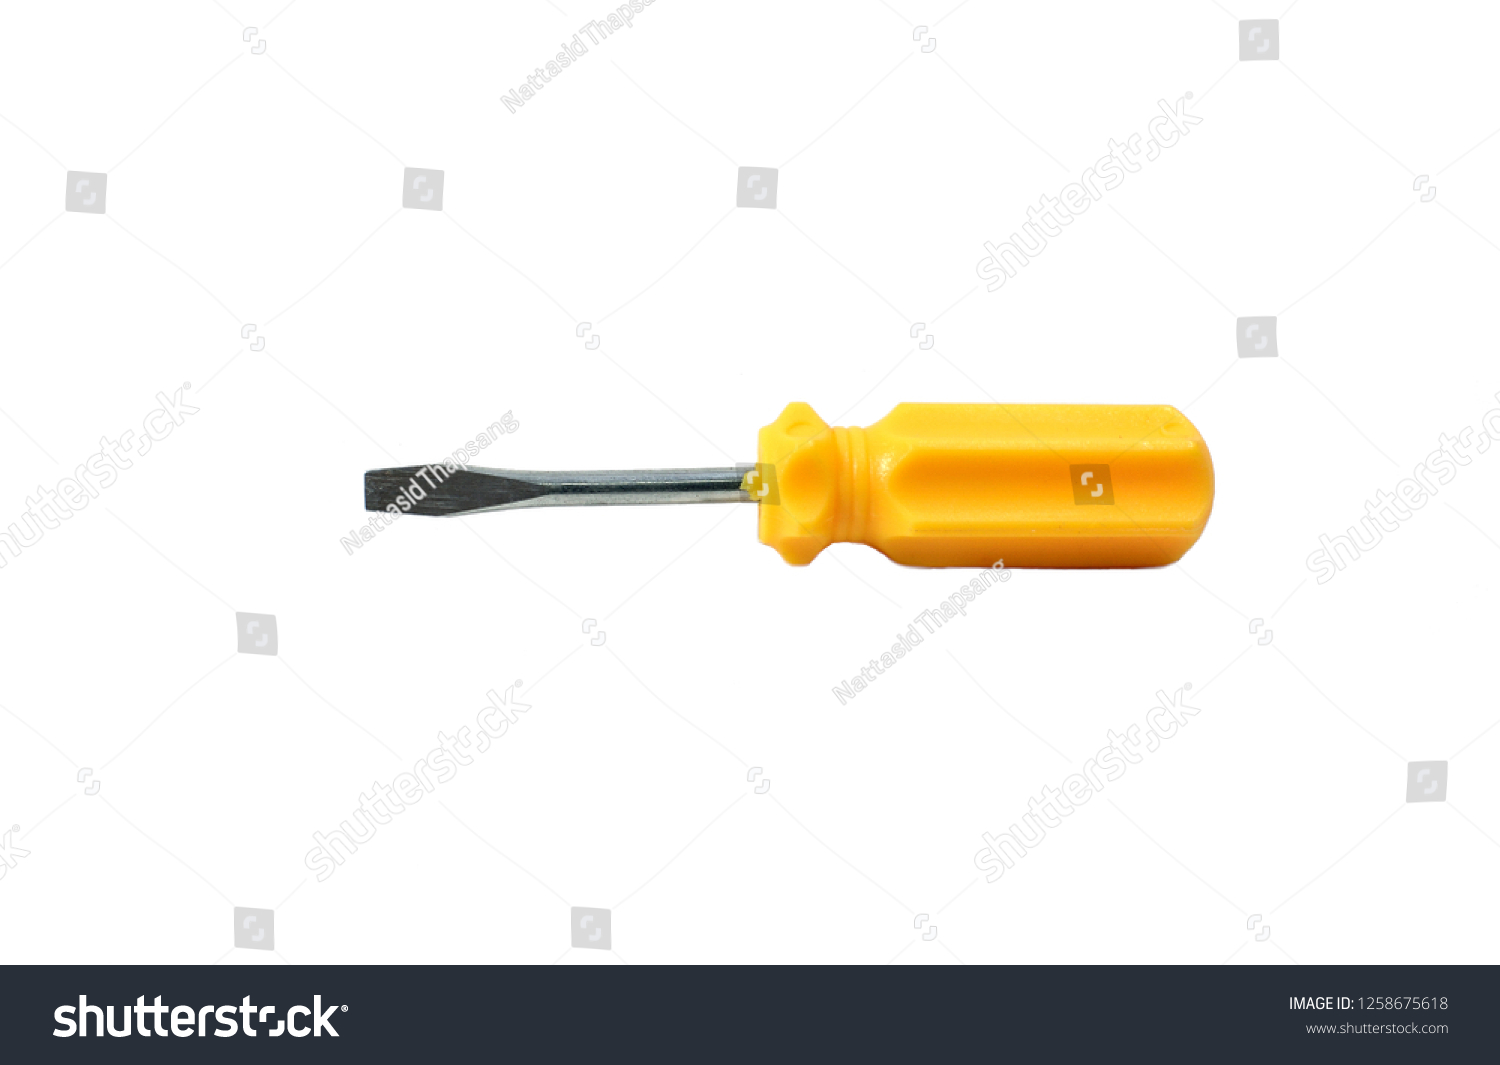 this is small yellow screwdriver isolated on white background #1258675618